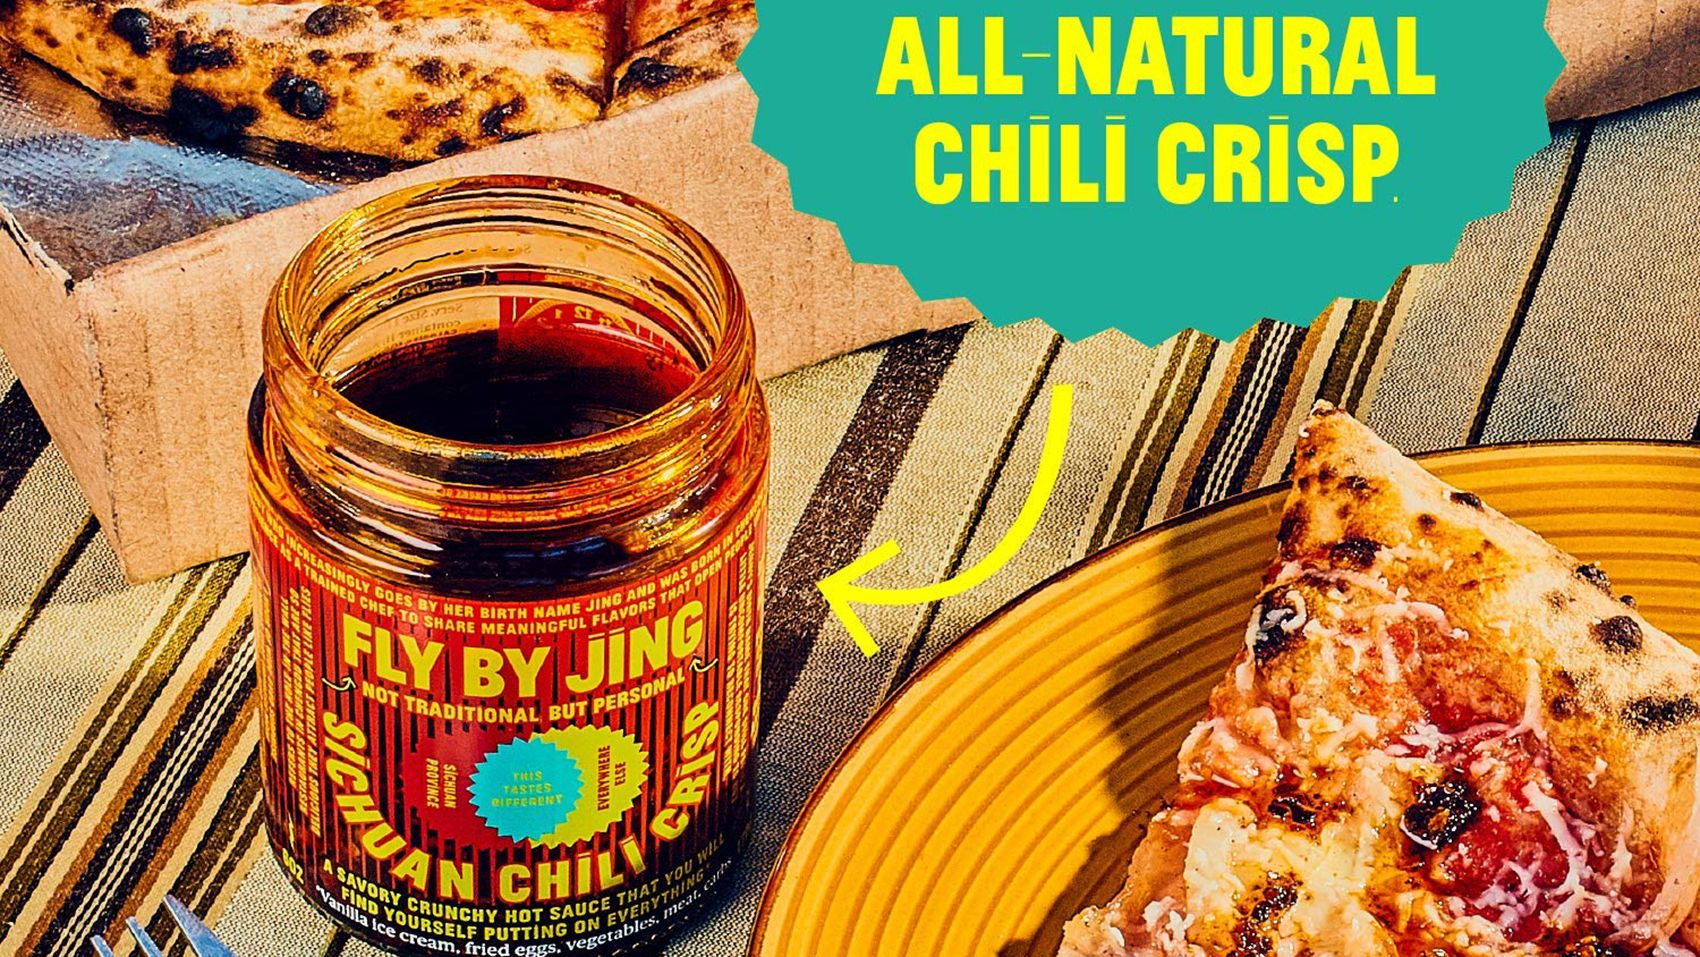 Spicy foods on  that reviewers are obsessed with